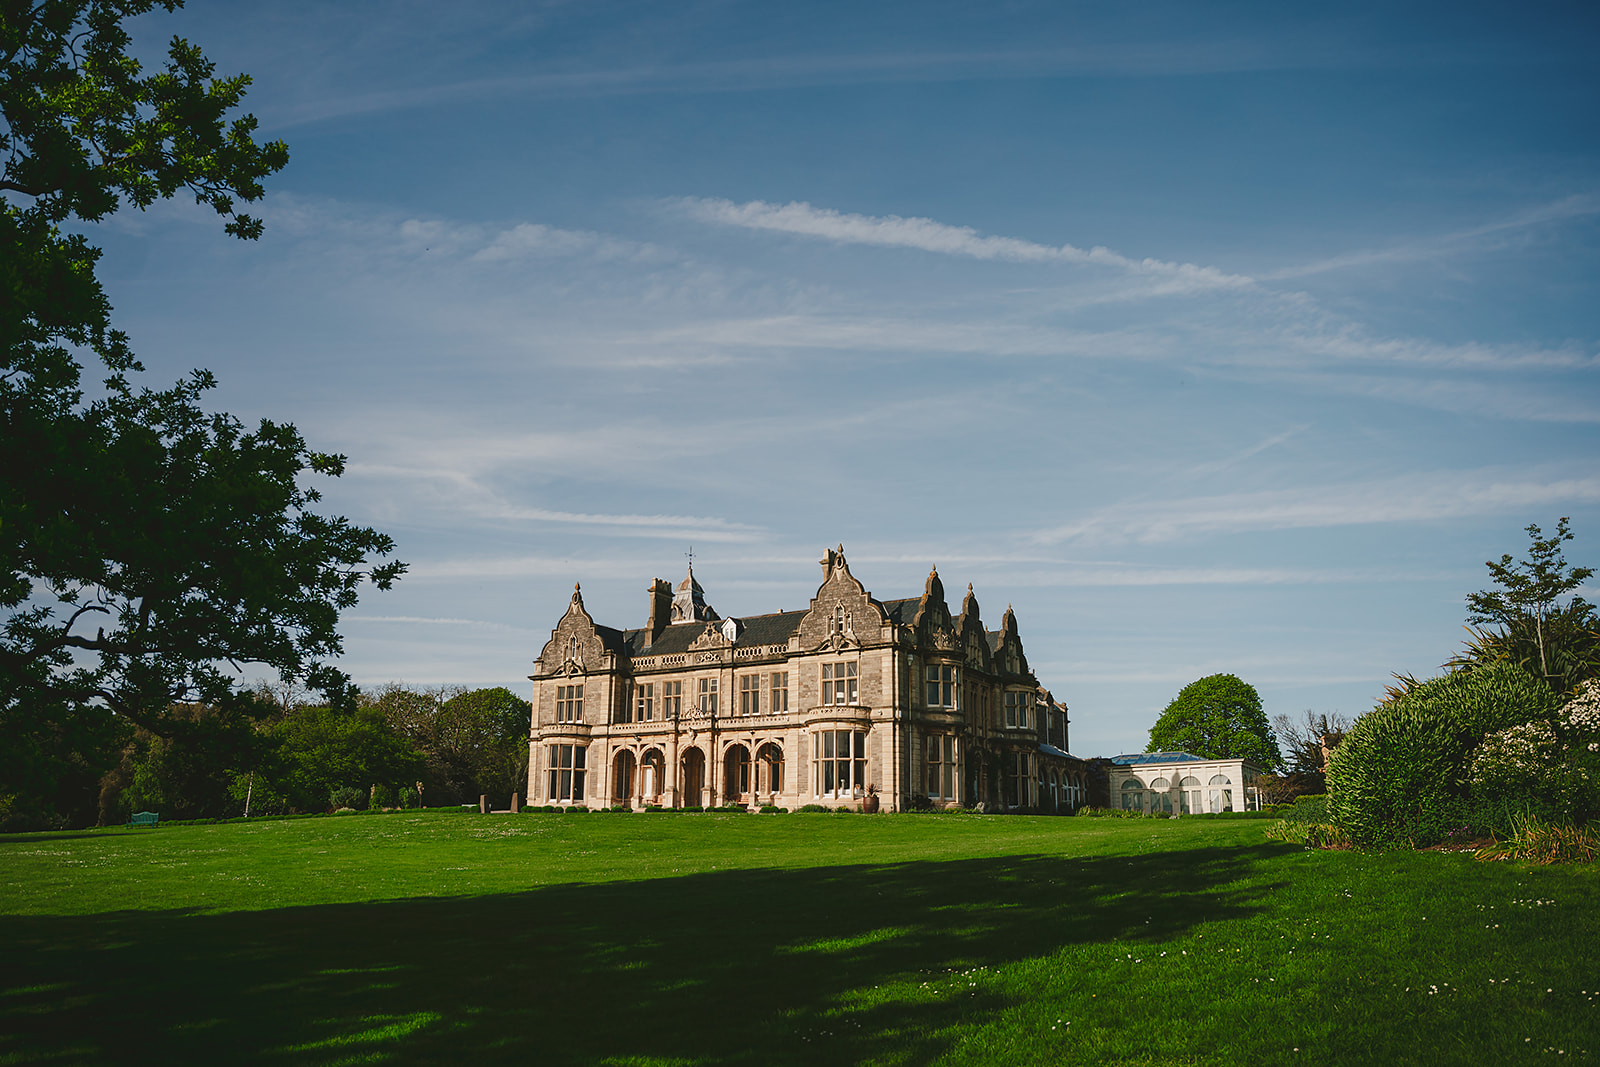 A grand mansion nestled in the center of a lush grassy field, perfect for captivating wedding photography at Clevedon Hall.